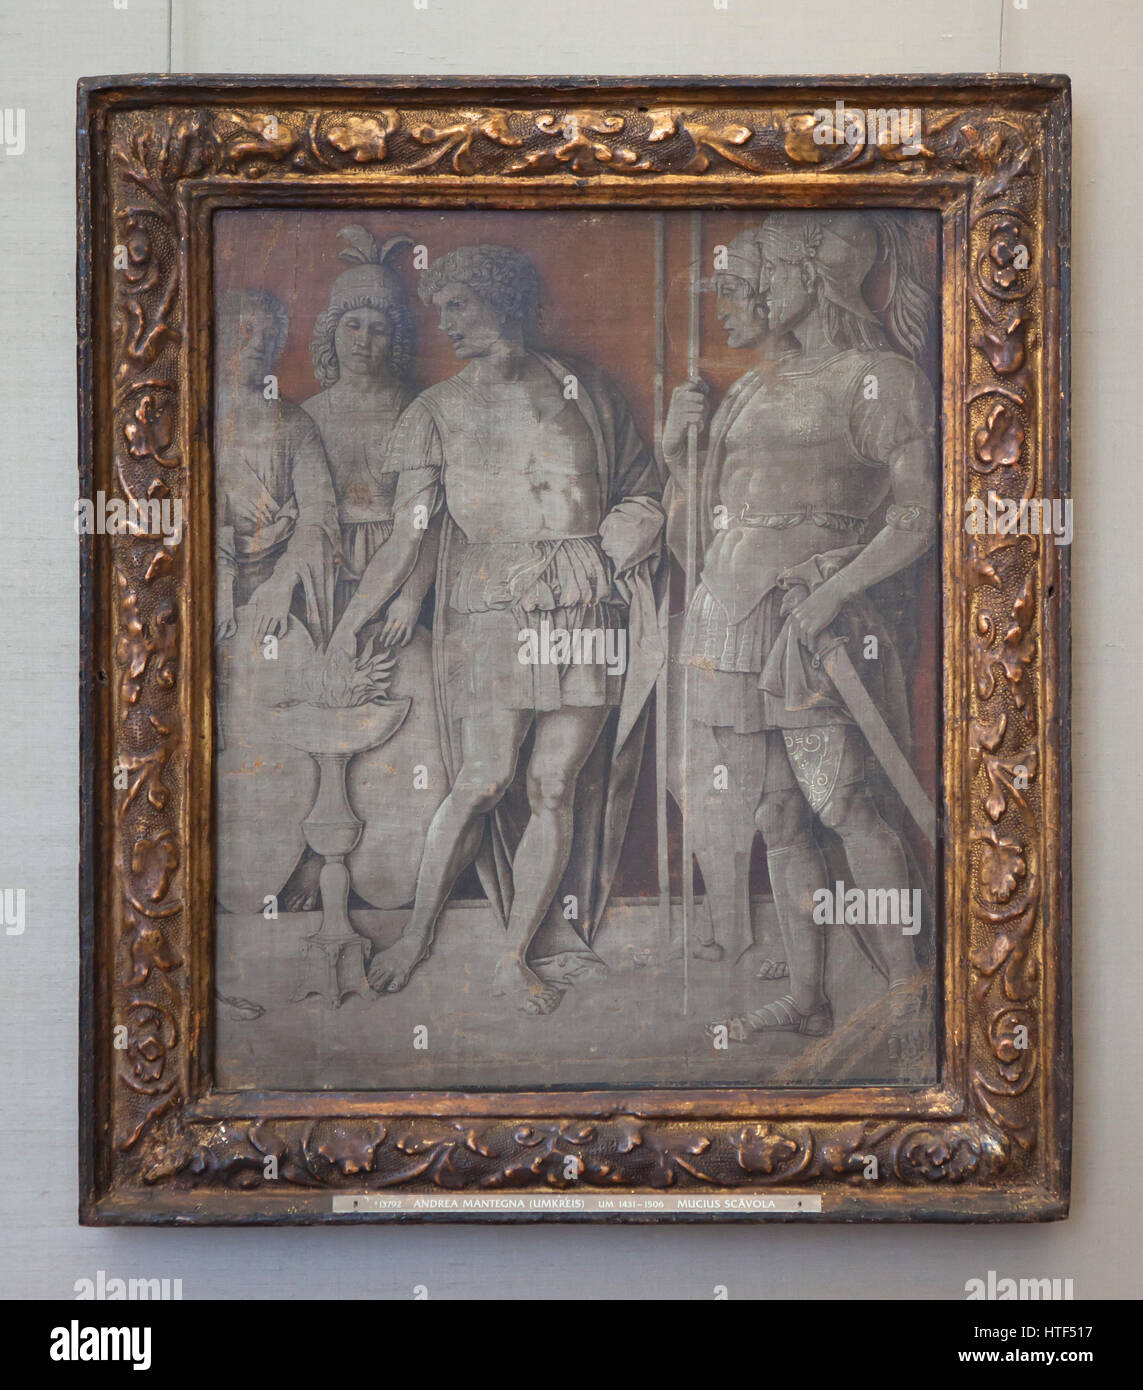 Painting Gaius Mucius Scaevola by Italian Renaissance painter Andrea Mantegna on display in the Alte Pinakothek (Old Pinacotheca) in Munich, Bavaria, Germany. Stock Photo